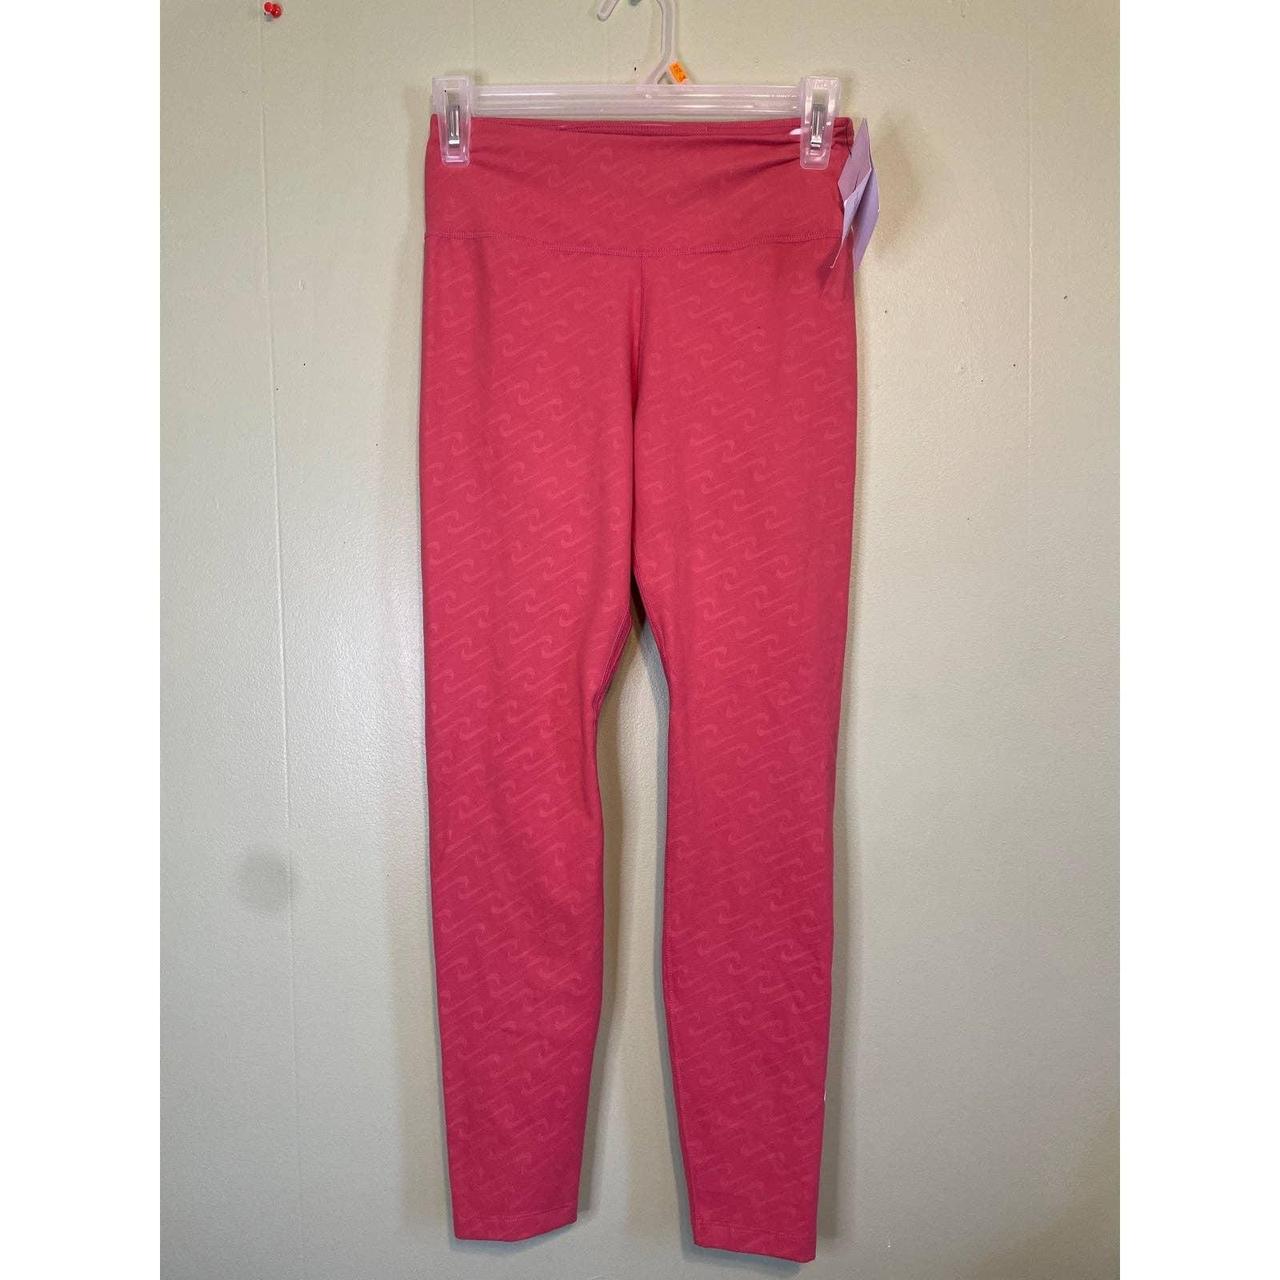 Womens small Nike Dri-fit leggings. Brand new with - Depop